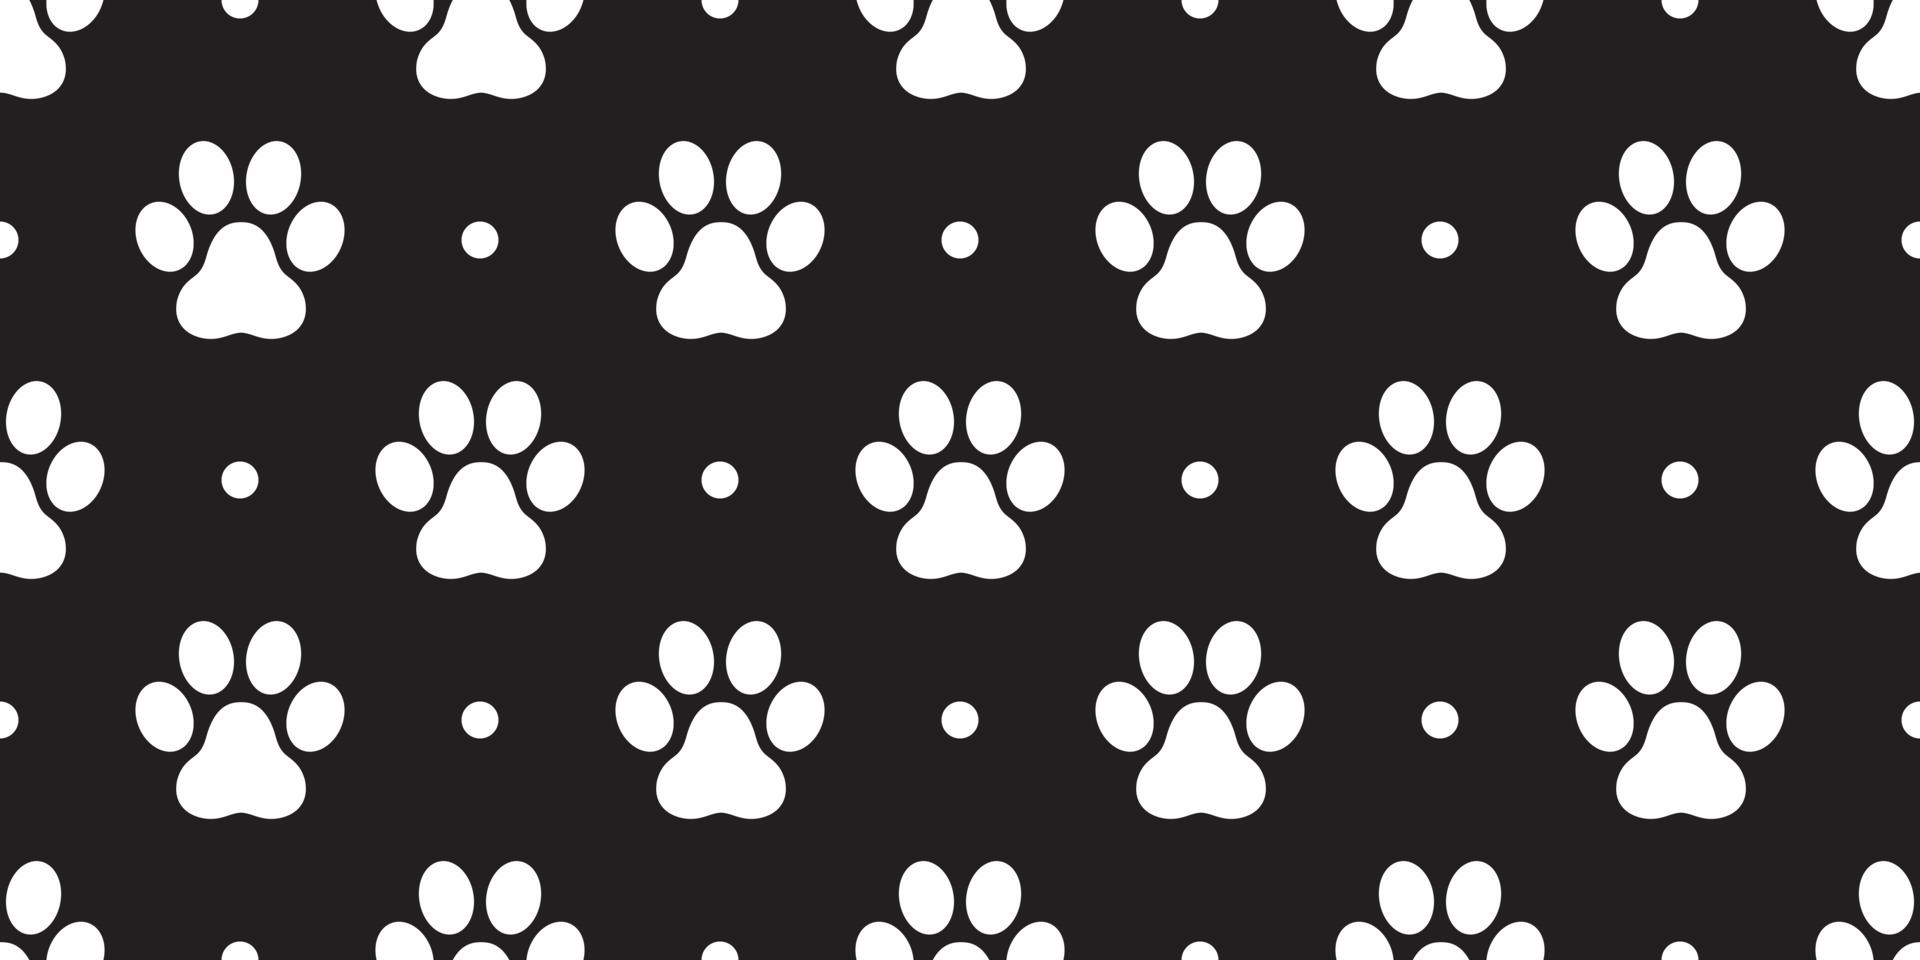 Premium Vector  Cat paws black and white background flat design cute cat  paws wallpaper vector illustration